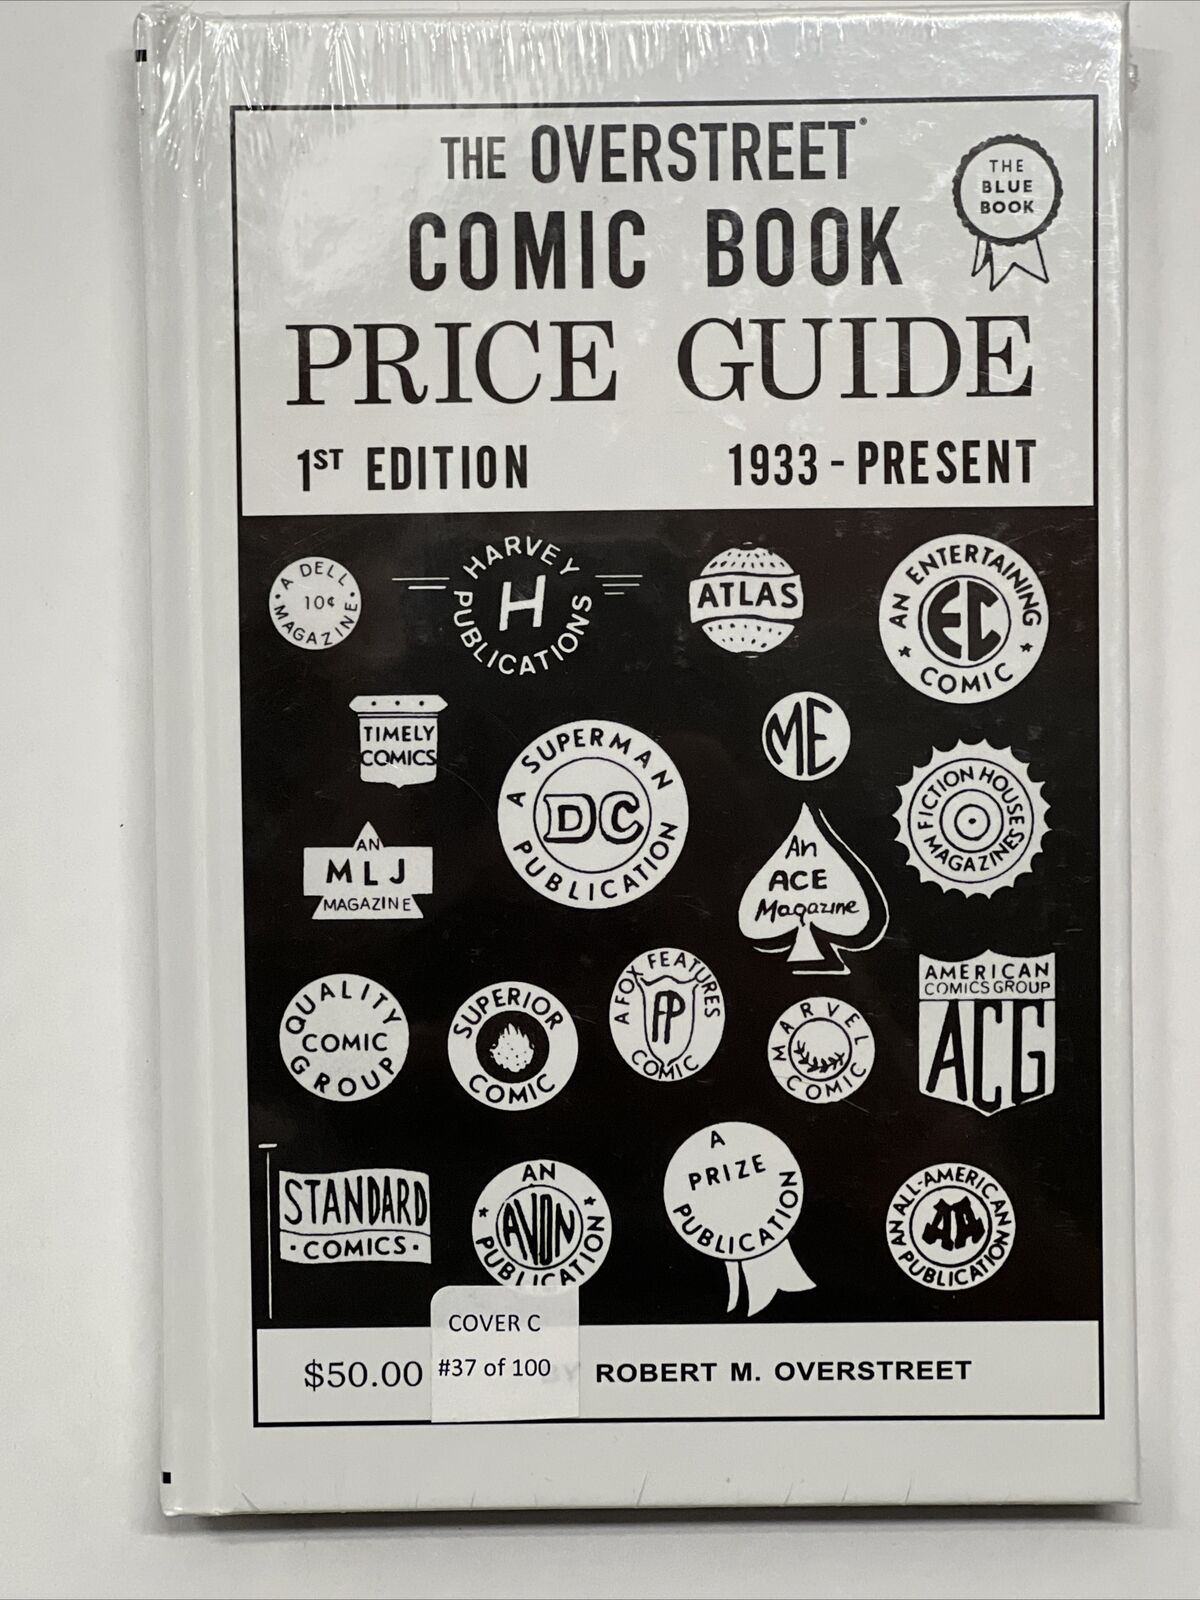 OVERSTREET COMIC BOOK PRICE GUIDE #1 SIGNED FACSIMILE 1st EDITION HARDCOVER /100